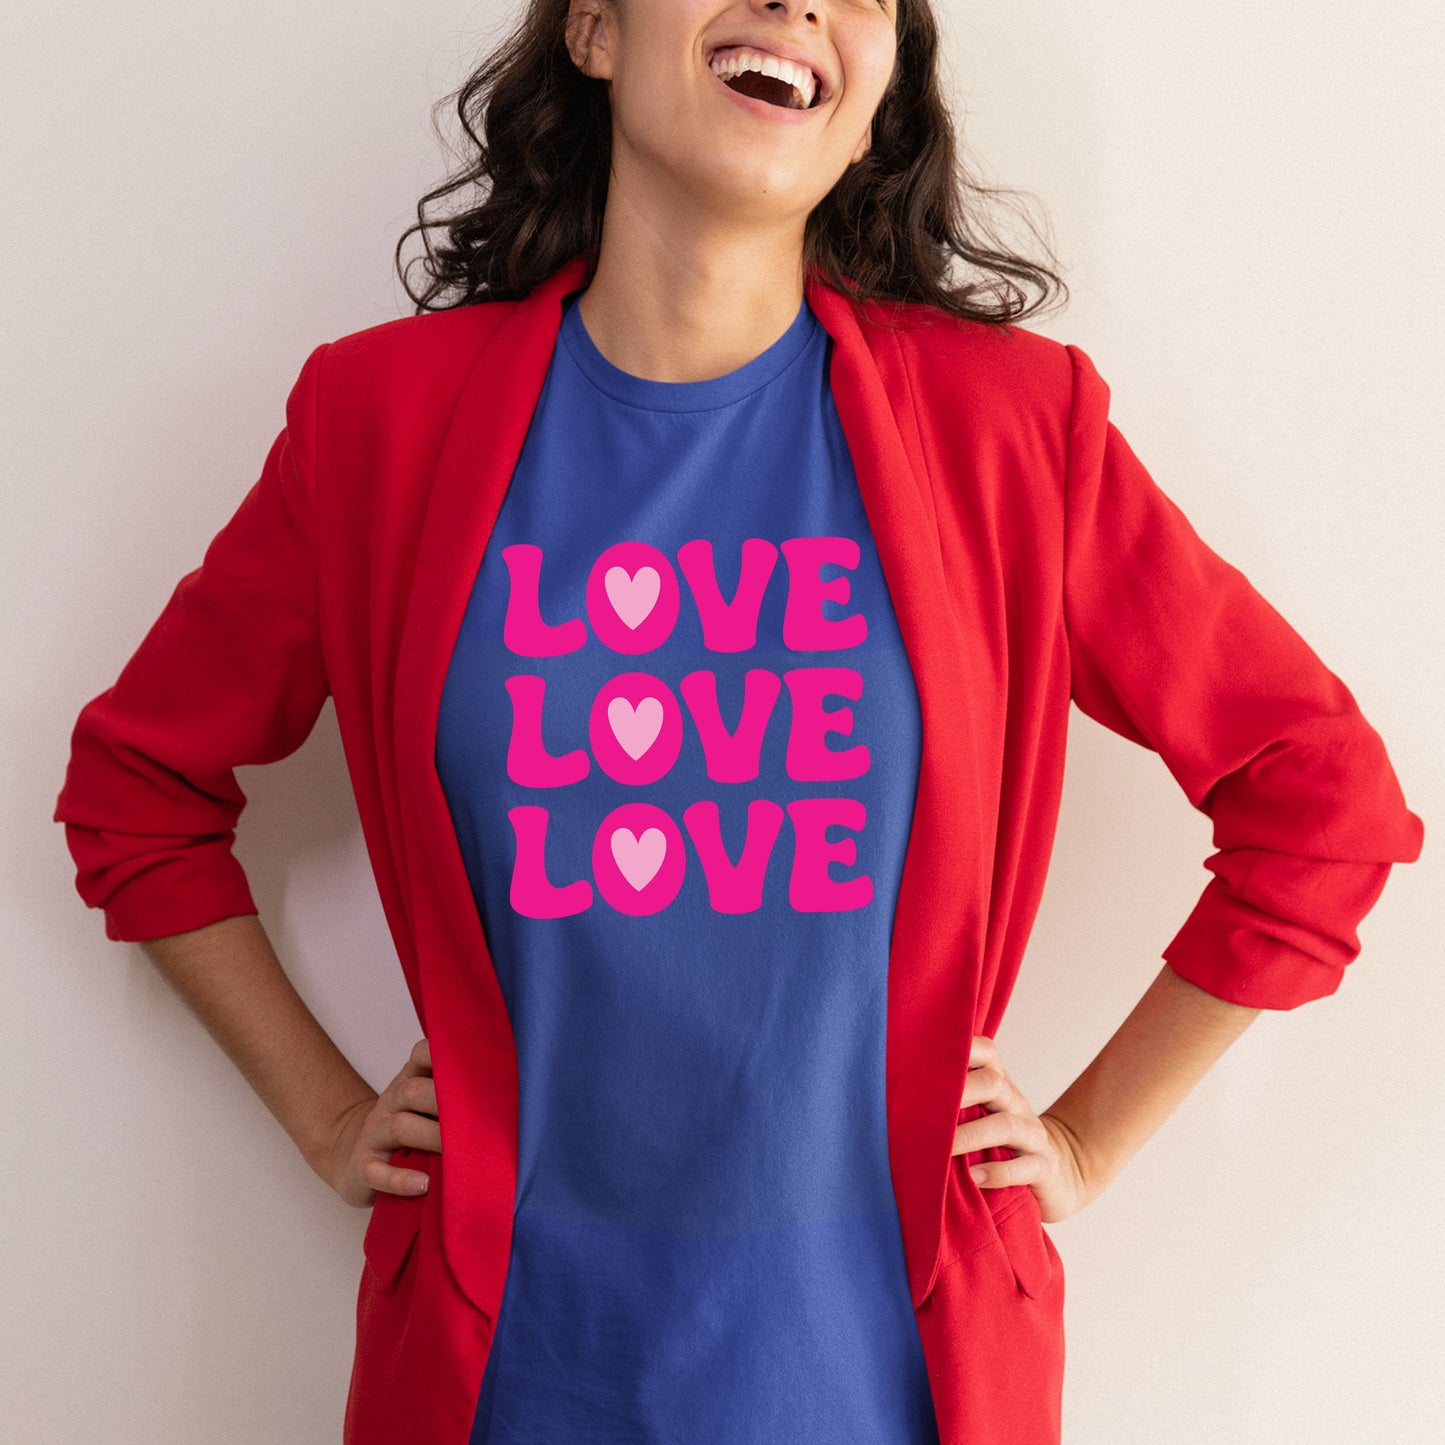 Love, Groovy Valentine, Retro Valentine, Funny Valentine, Valentines Shirt Women, Valentines Shirt for Her, Valentines Gifts for Her